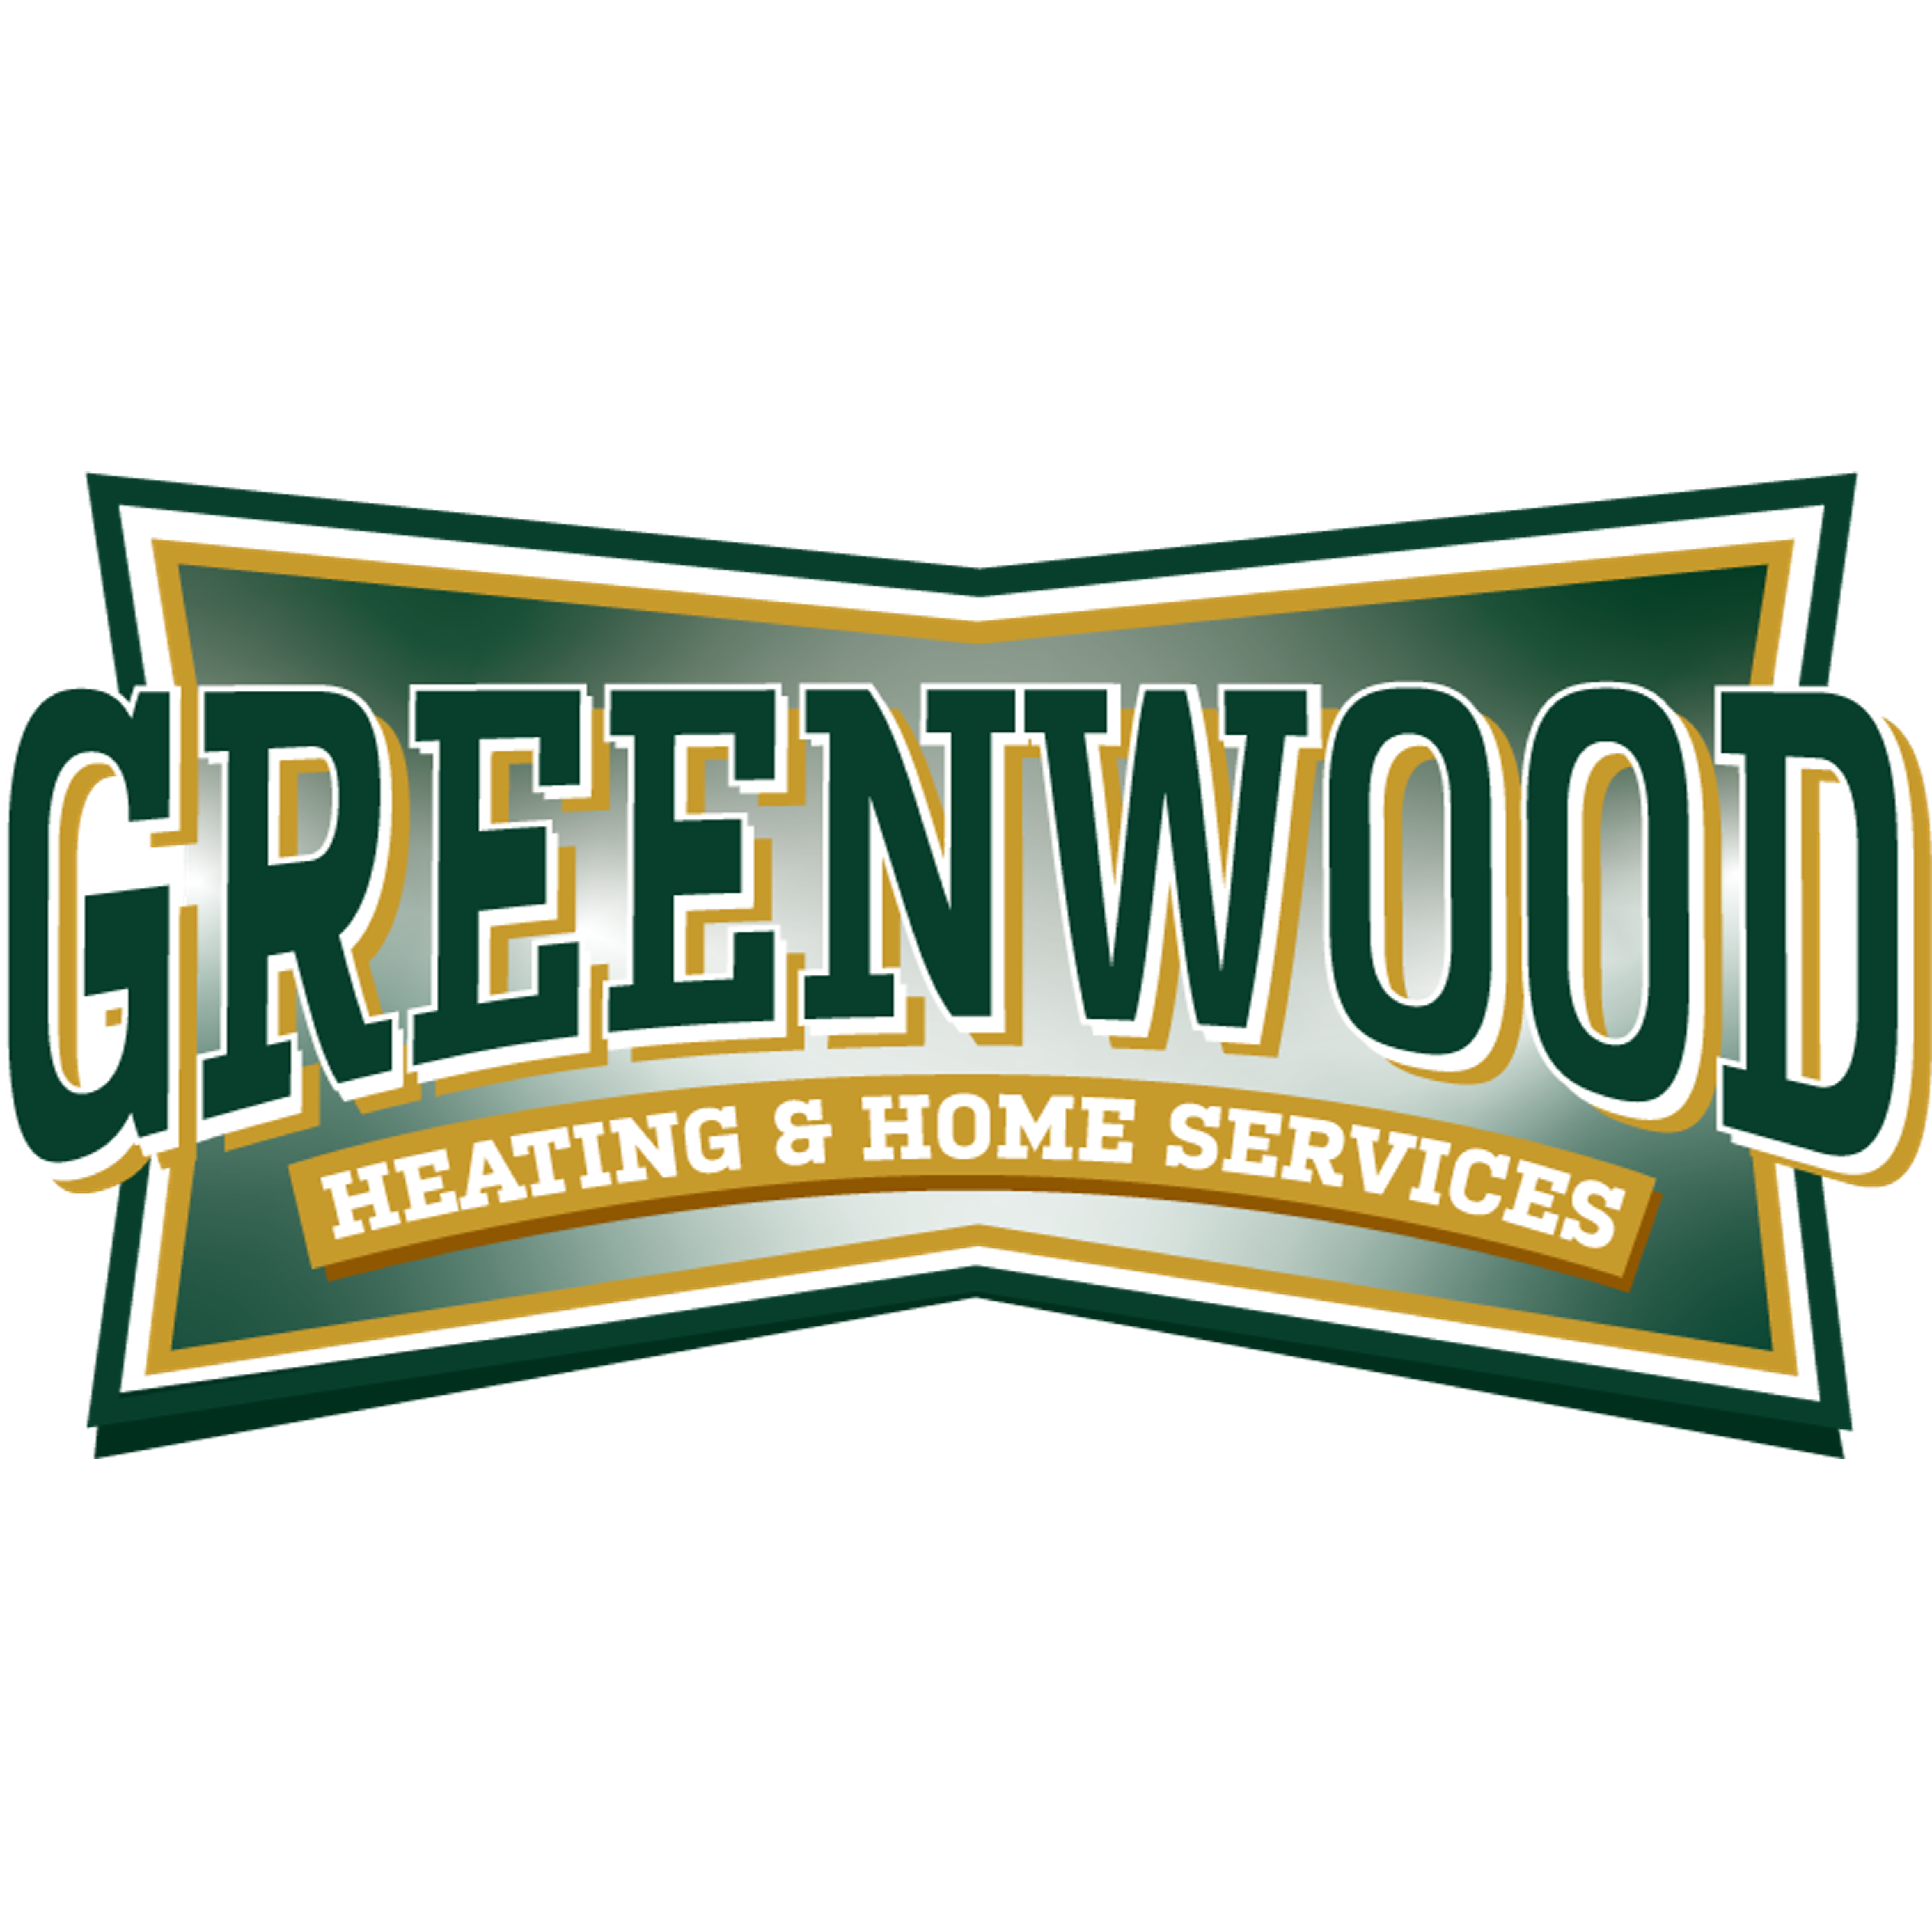 Greenwood Heating and Home Services - Seattle, WA 98168 - (206)207-4734 | ShowMeLocal.com